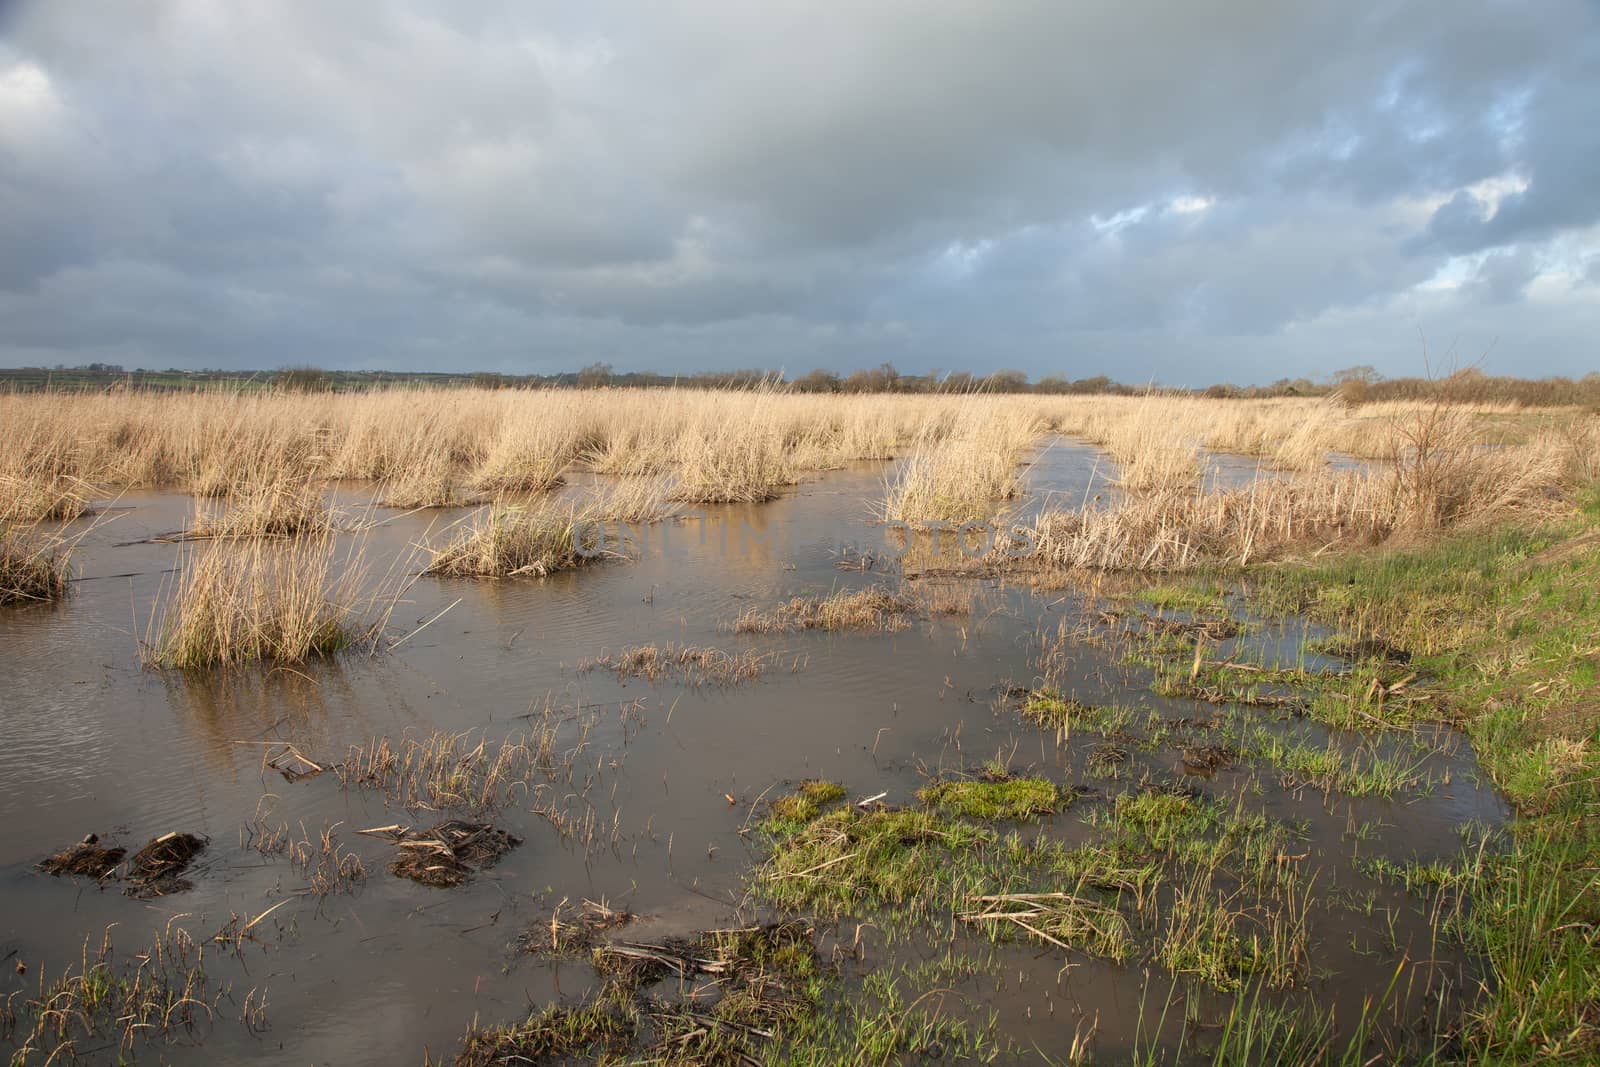 Green grass leads to water in a managed wetland area with planted yellow dried reeds in rows against a cloudy sky.